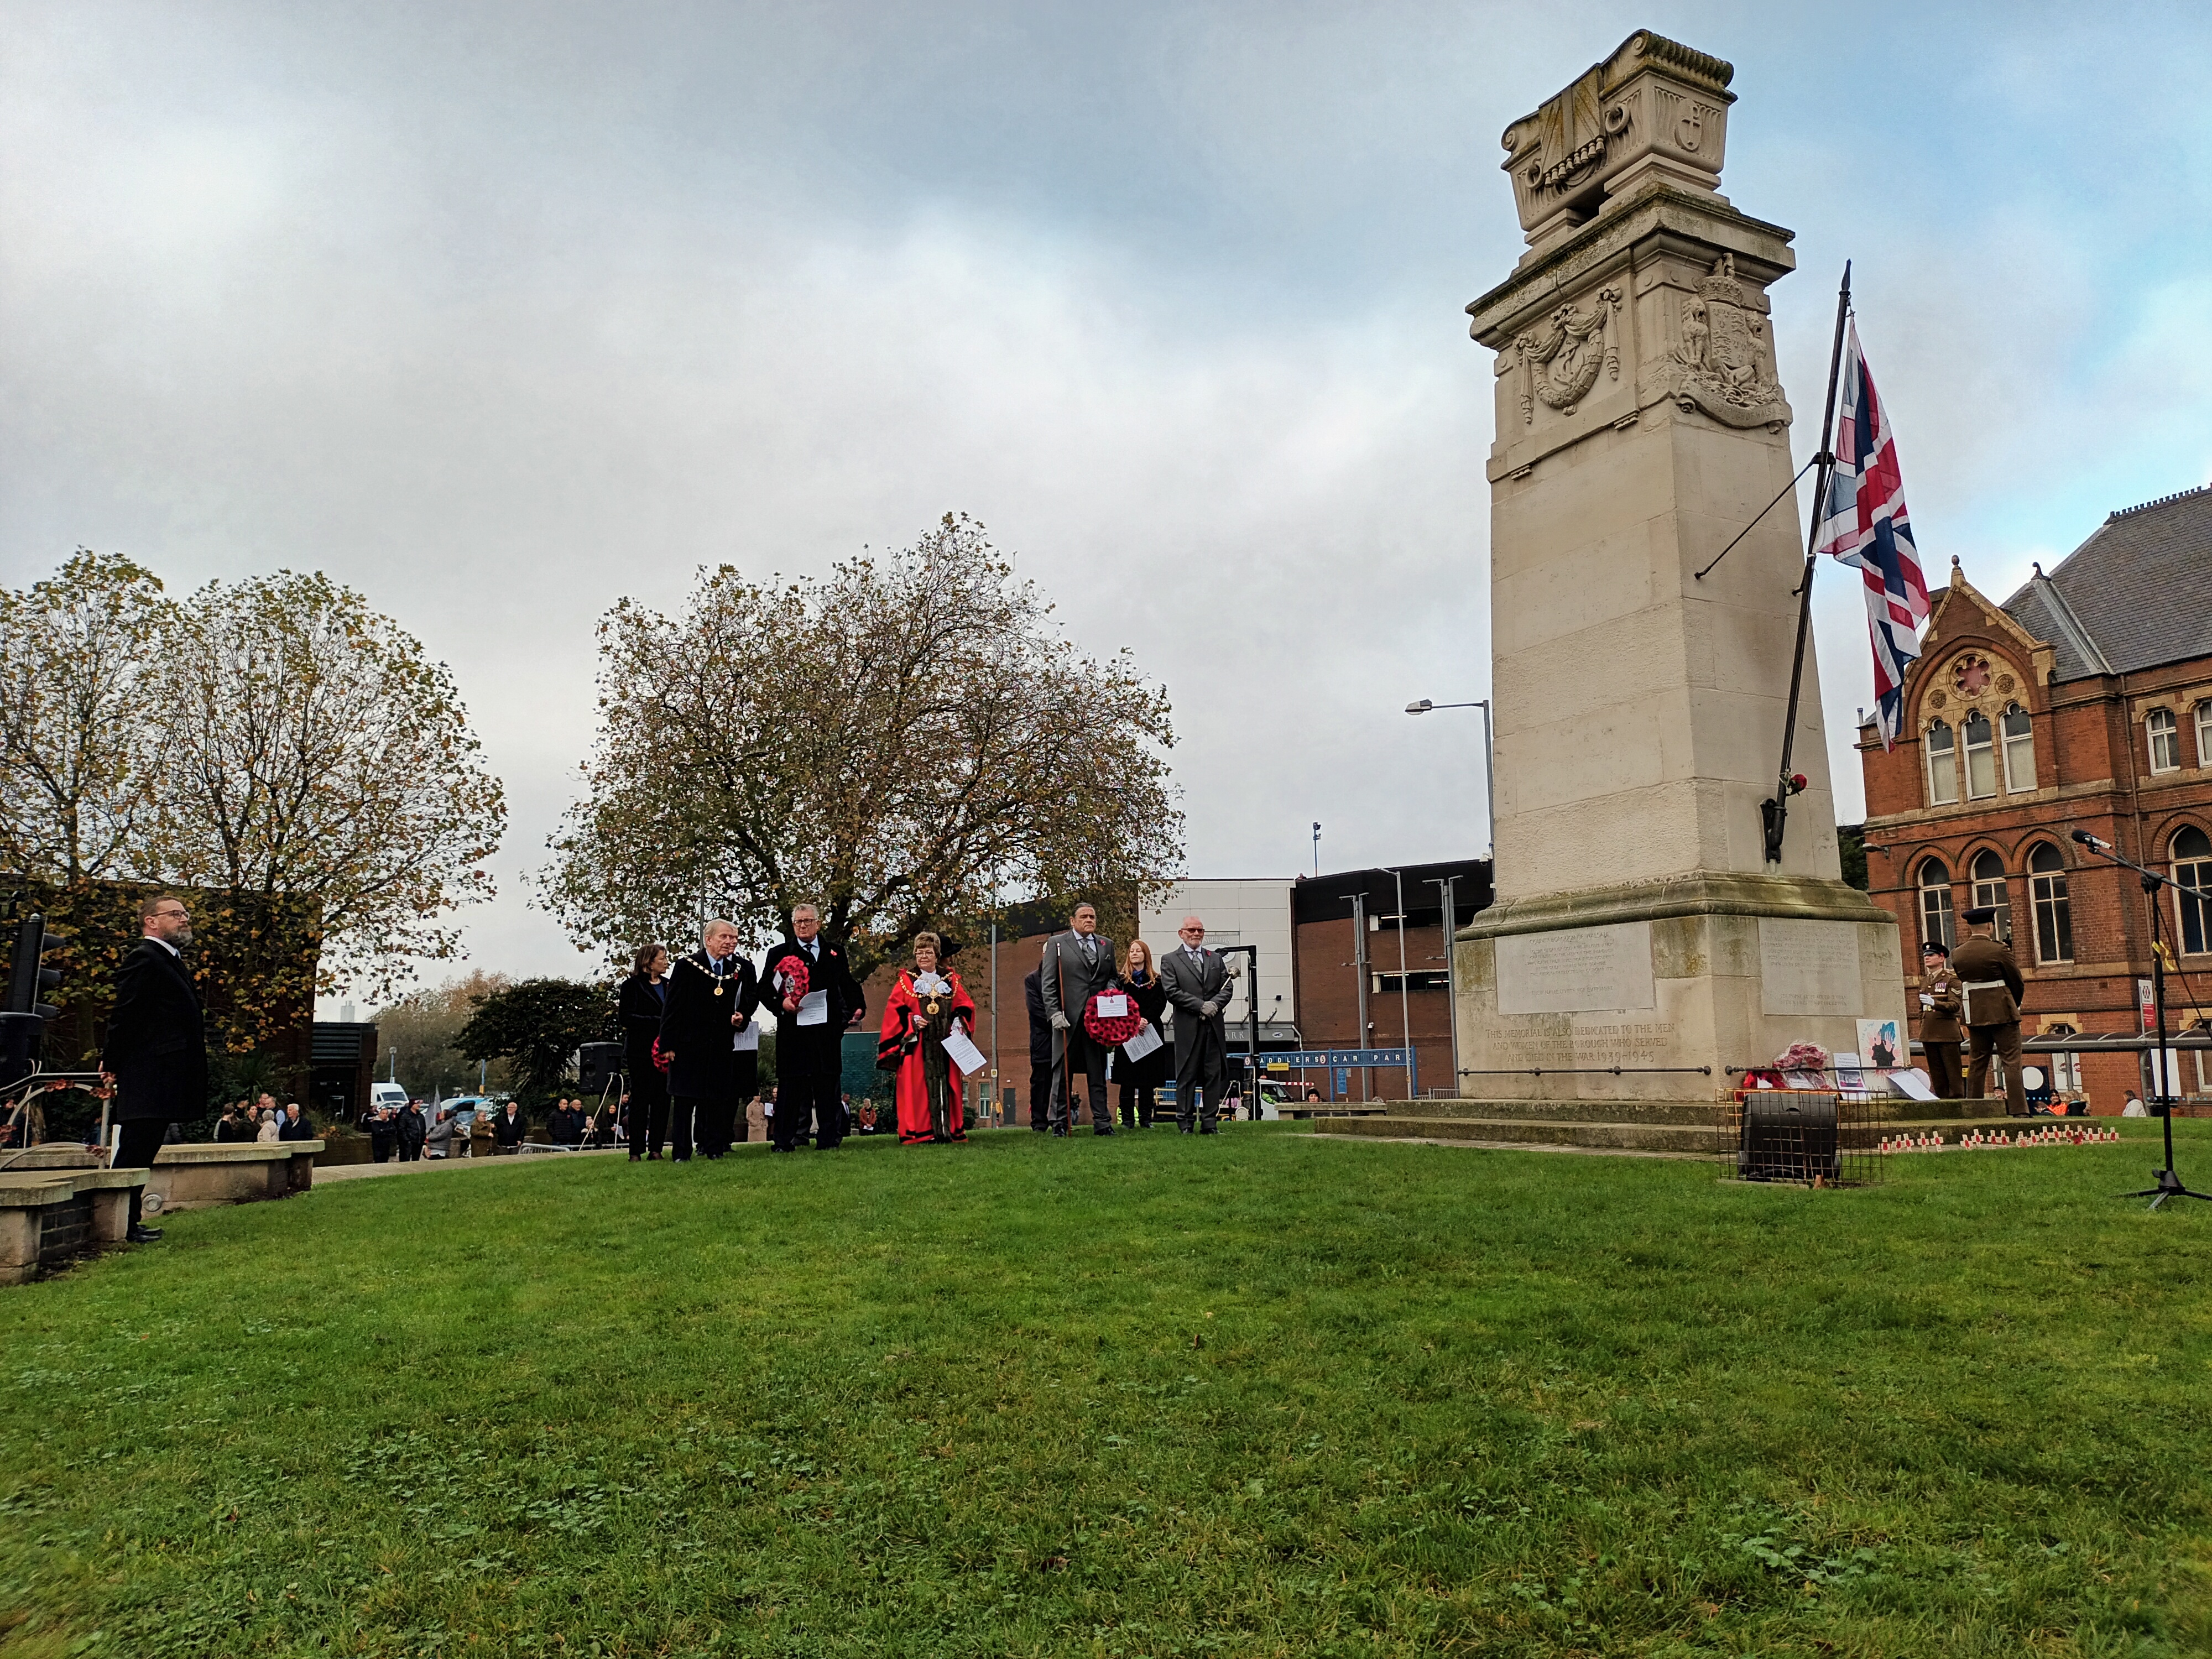 The service at the Cenotaph in Walsall